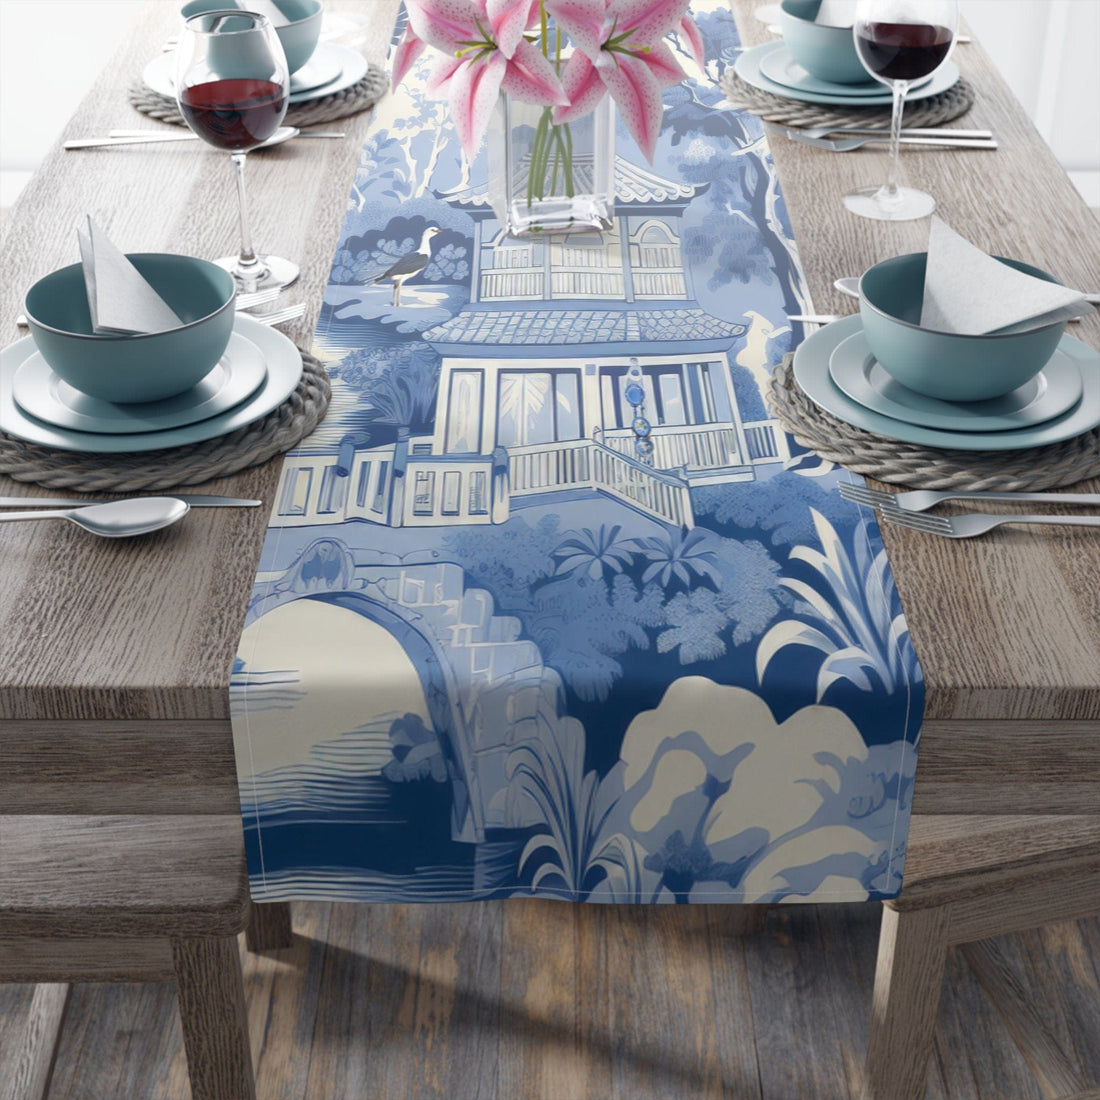 Kate McEnroe New York Chinoiserie Pagoda Floral Table Runner, Country Chic Farmhouse Table Linens, Wedding Table Decor, Grandmillenial Kitchen Decor - 11218823Table Runners11028128751735262675